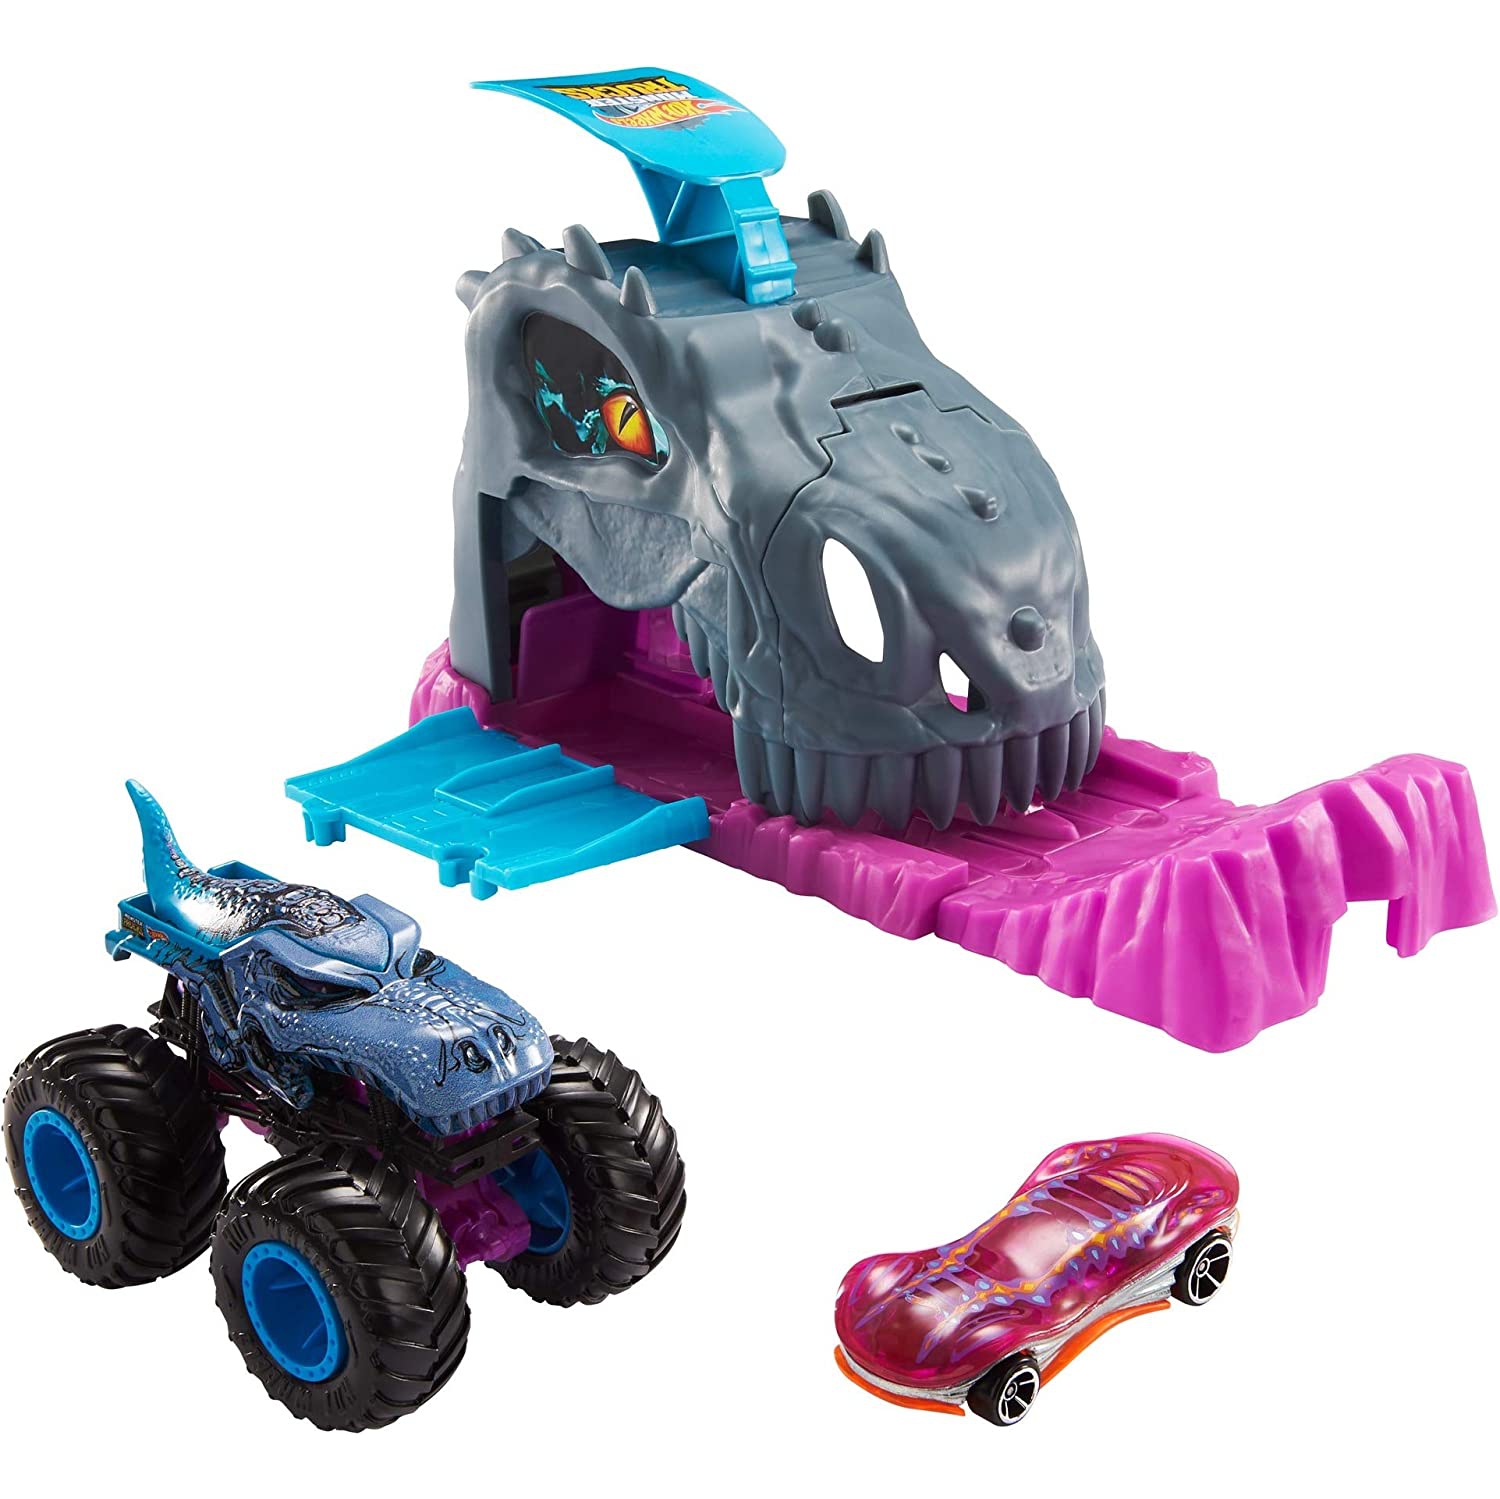 Hot Wheels Monster Truck Pit & Launch Playsets with a 1 Monster Truck & 1 Hot Wheels 1:64 Scale Car, Great Gift for Kids Ages 4 Years & Older